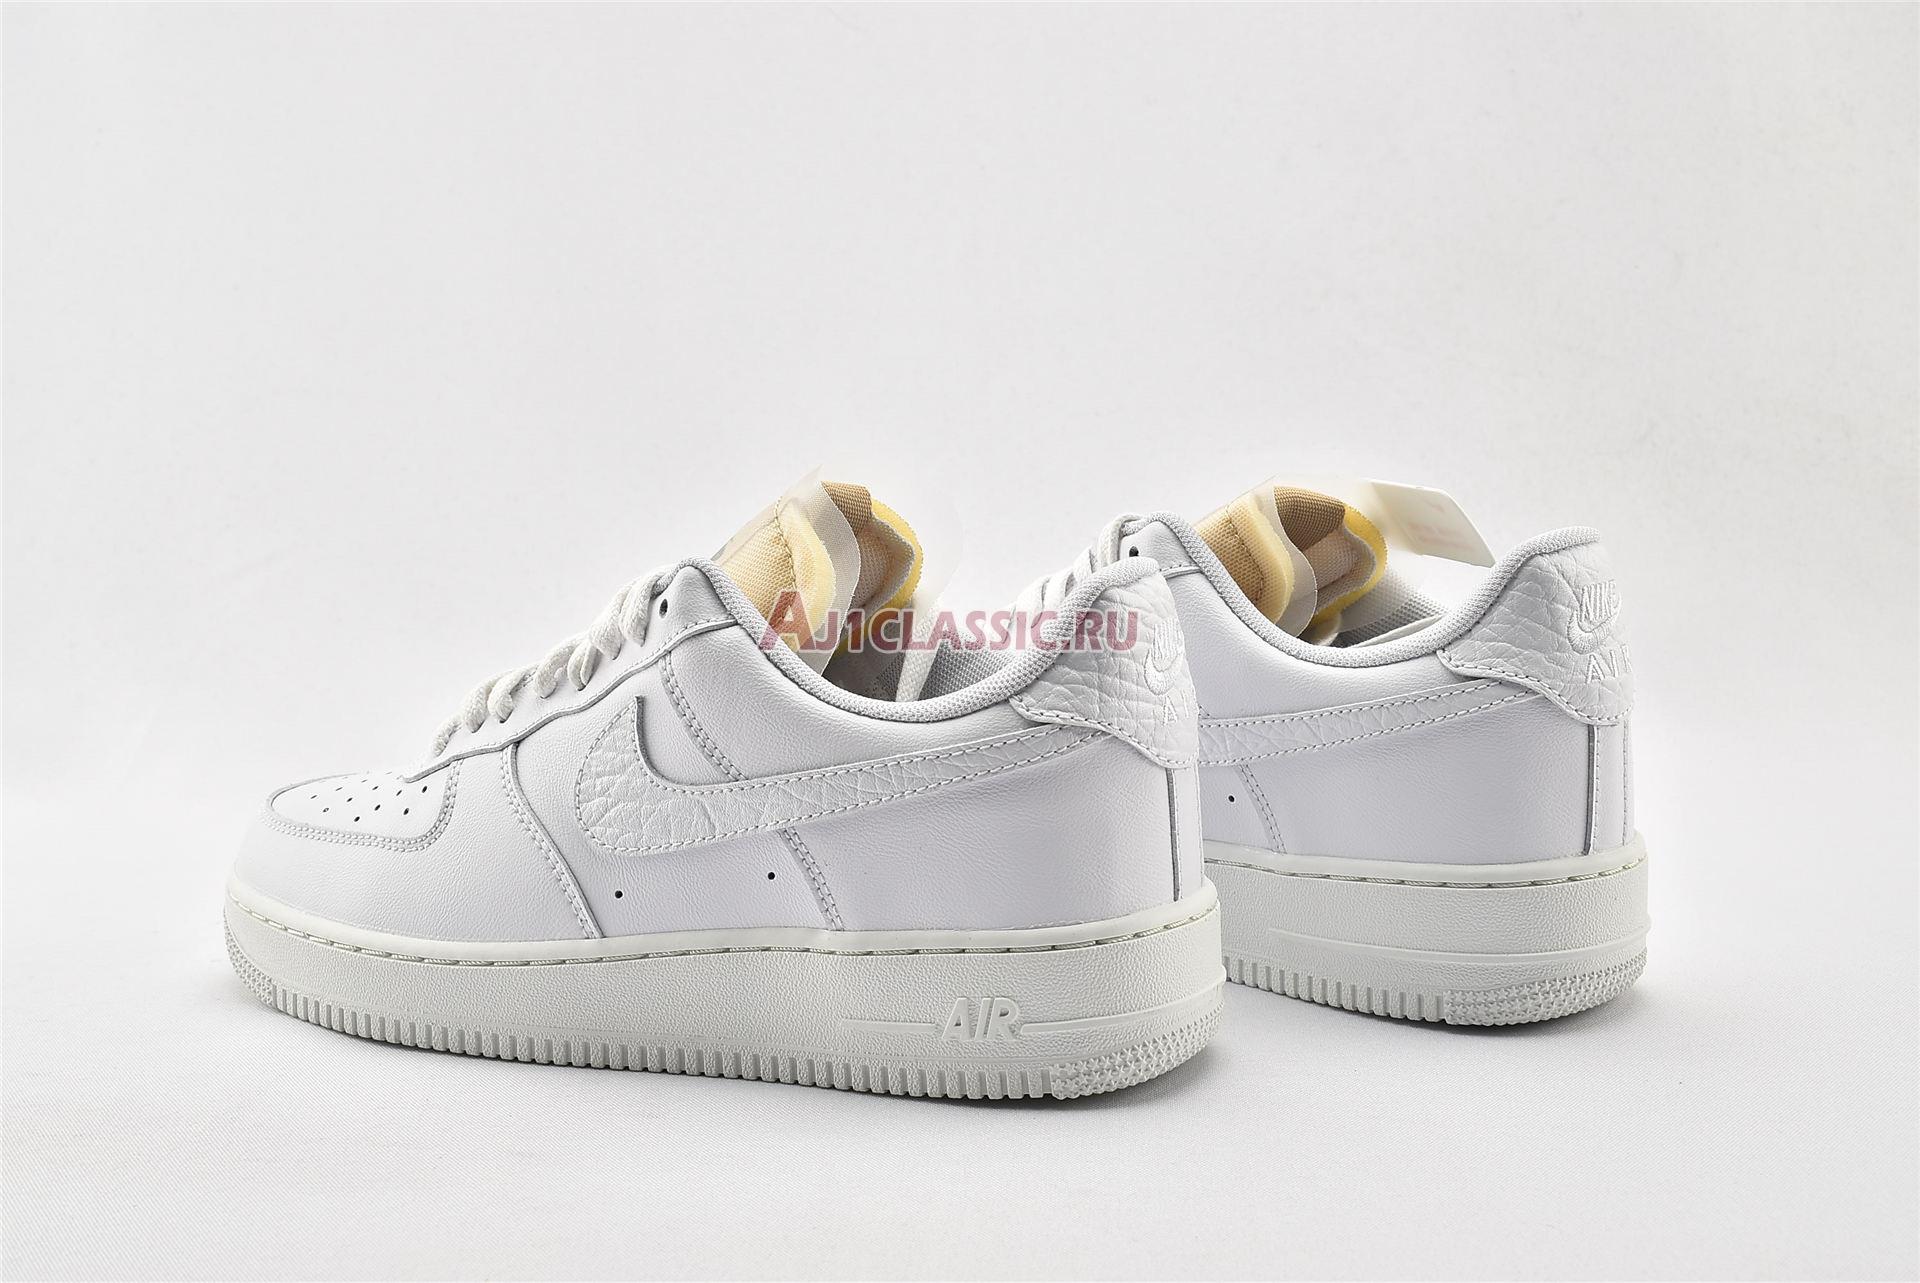 Nike Air Force 1 Low 07 LX "Bling" CZ8101-100